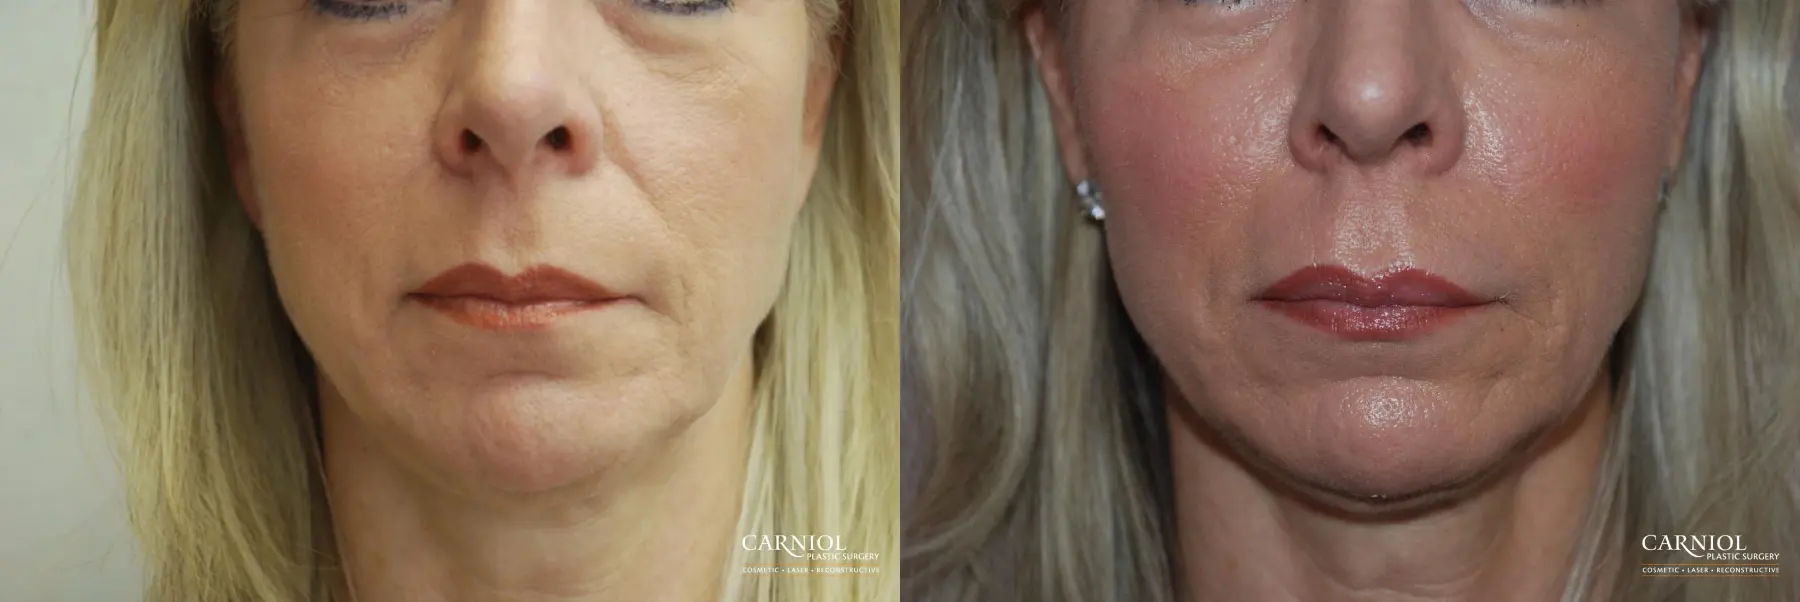 Non-Surgical Mini-Facelift: Patient 7 - Before and After  